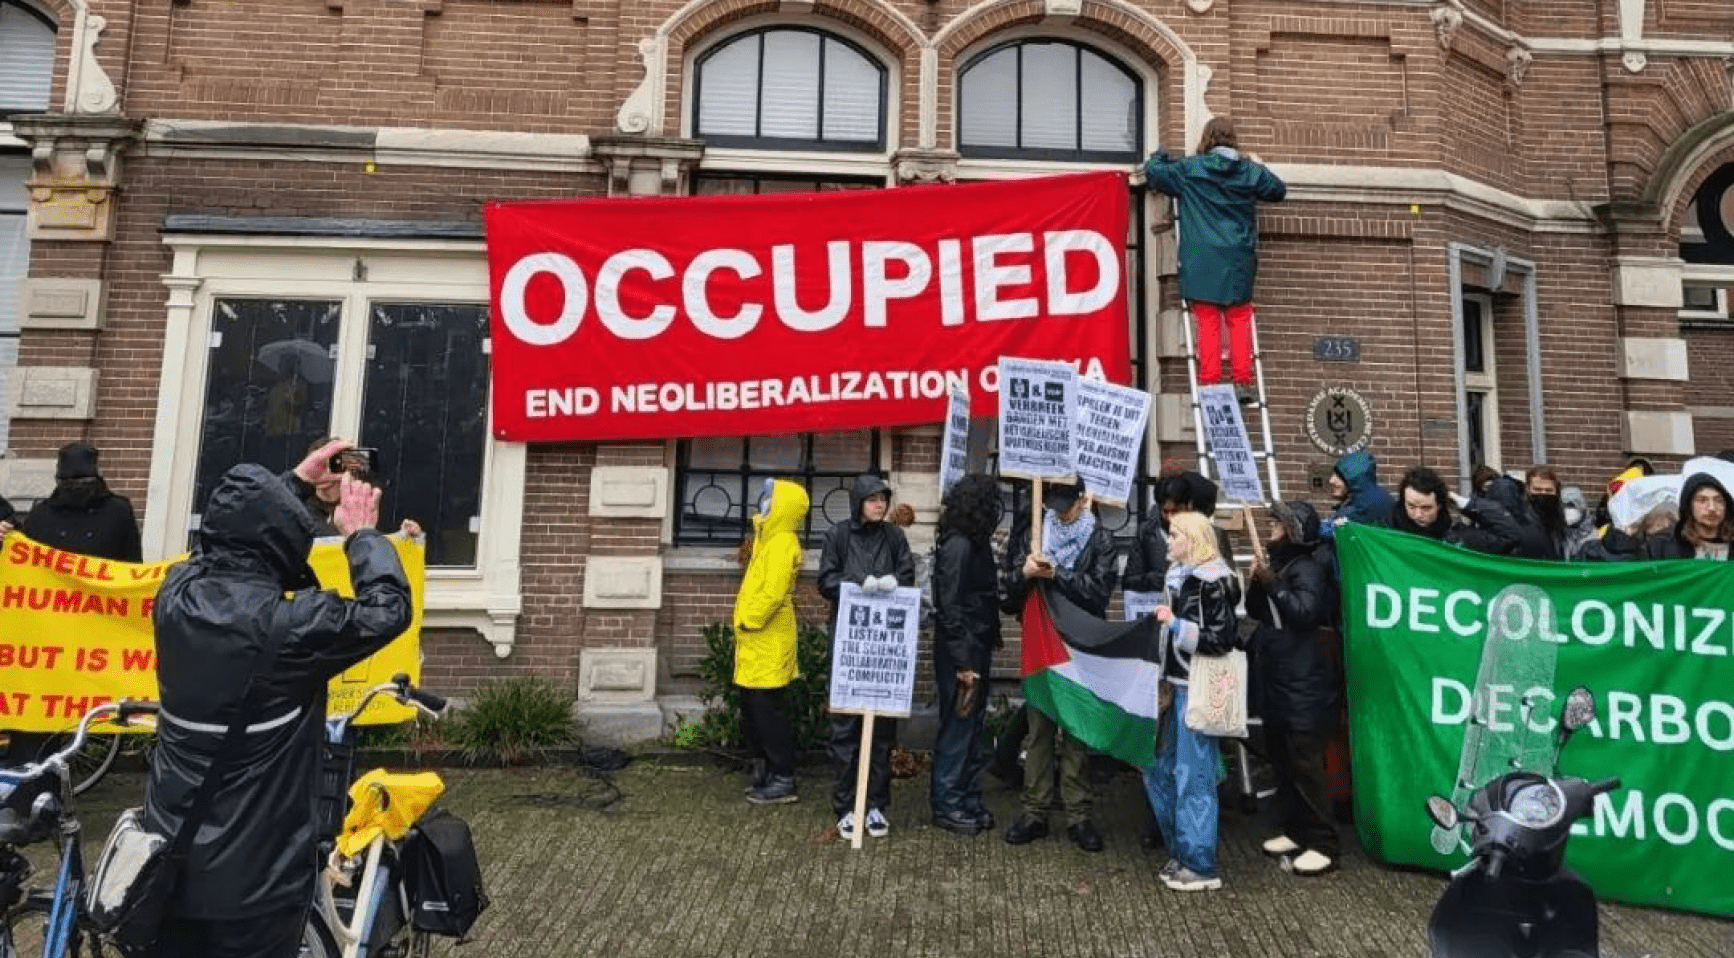 Climate activists occupy a building at the University of Amsterdam over connections to Shell